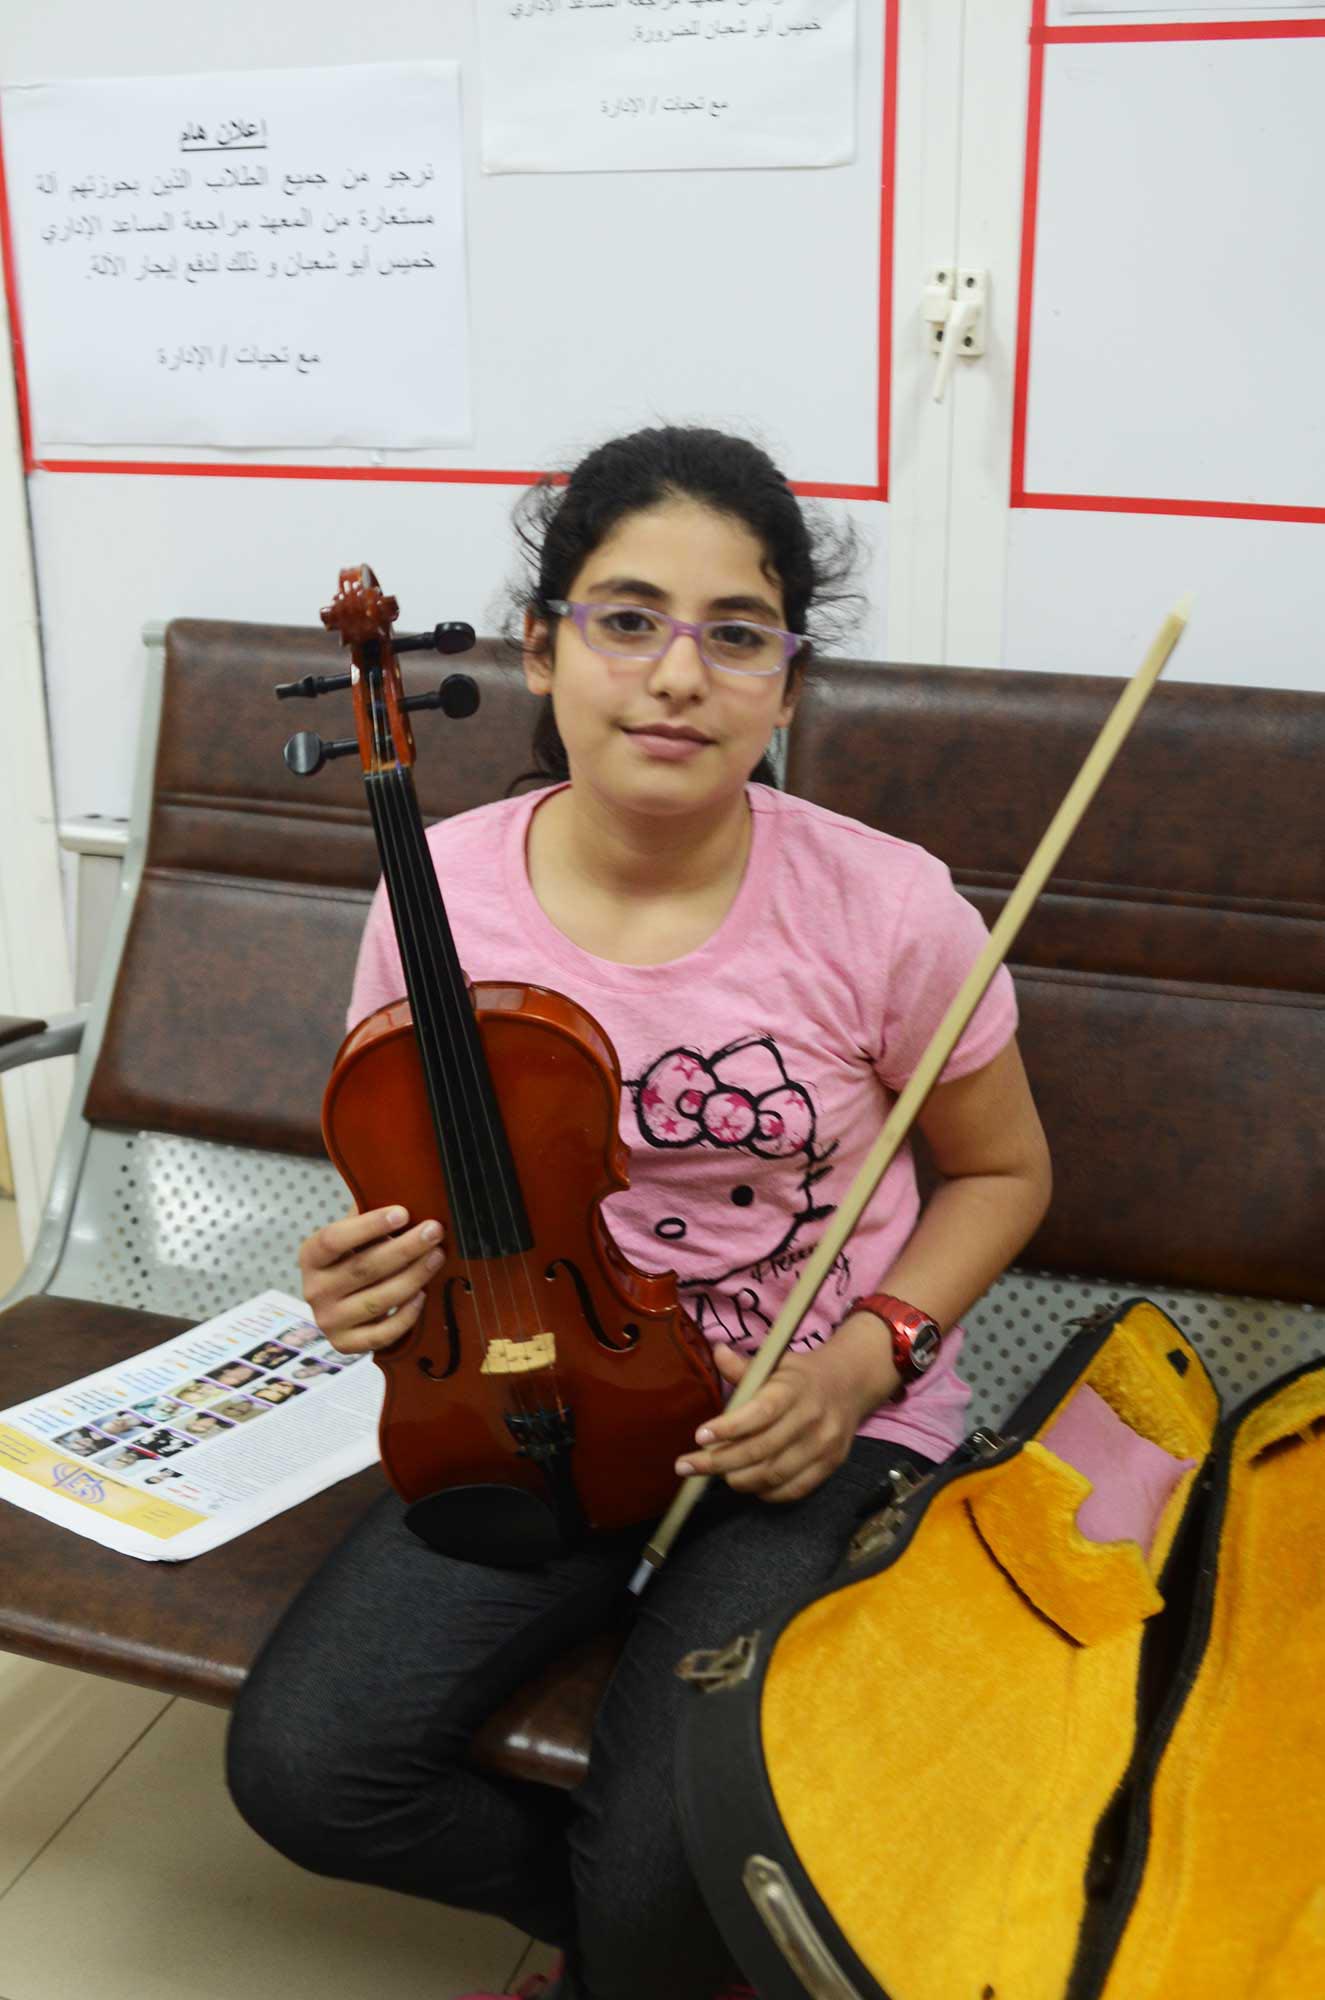 Students use the instruments and their talents to express emotions.